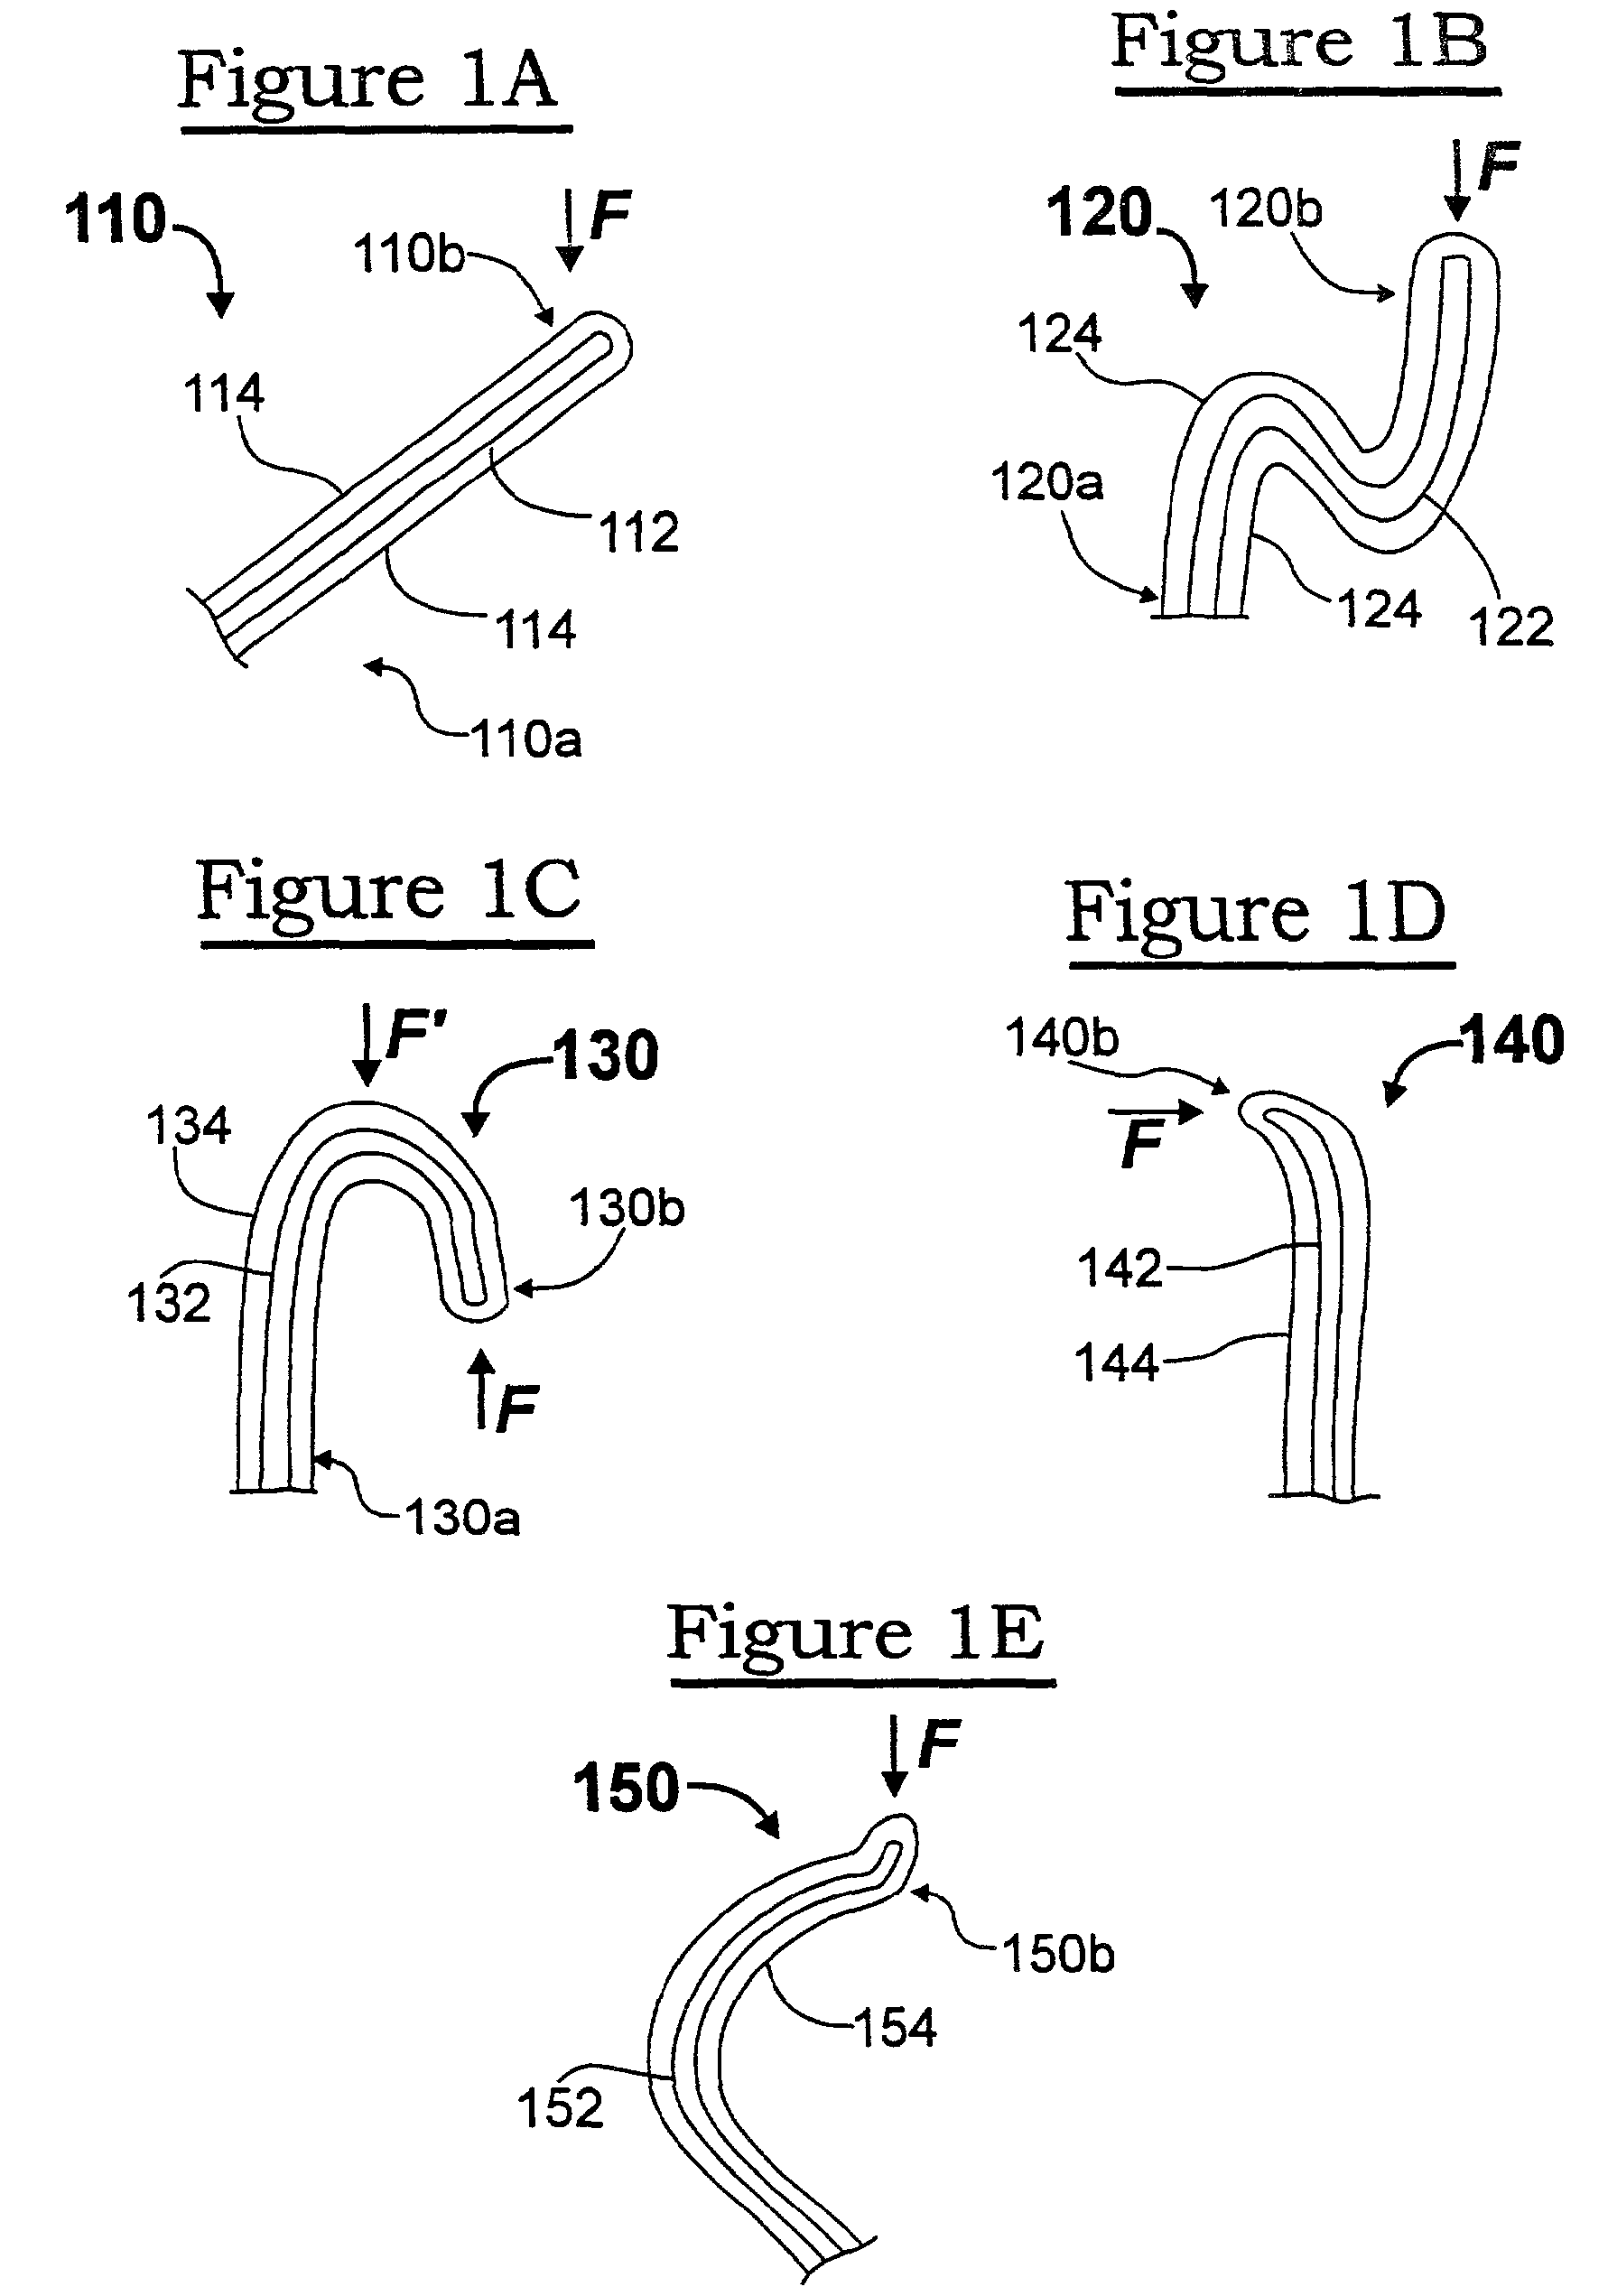 Probe card assembly and kit, and methods of making same